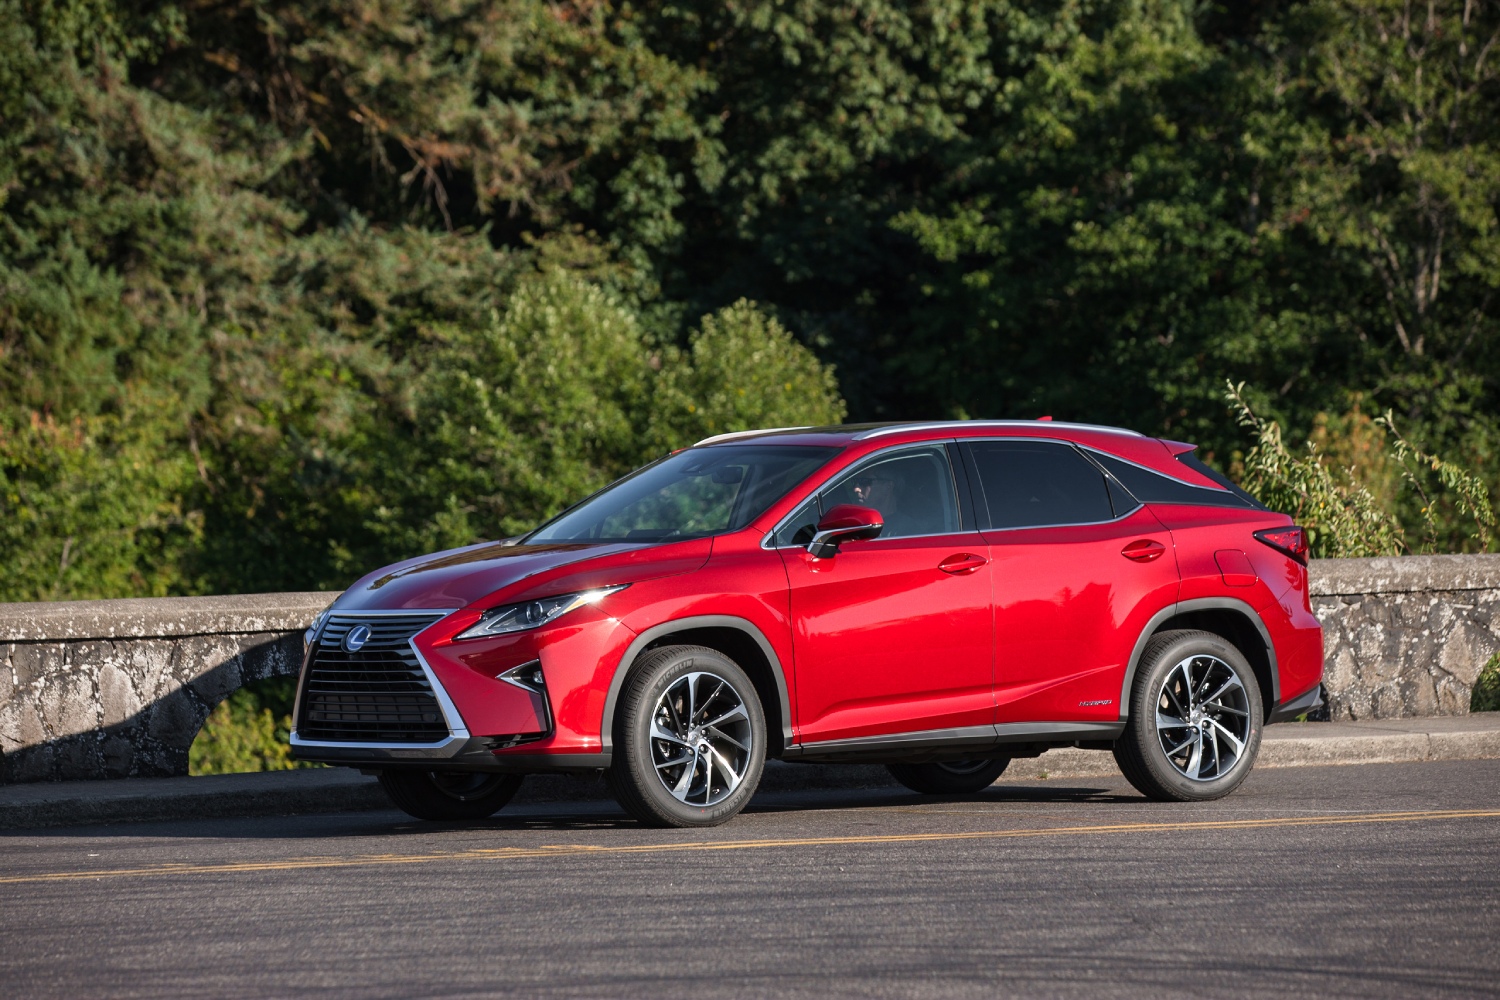 This family-friendly used midsize SUV is a Lexus RX